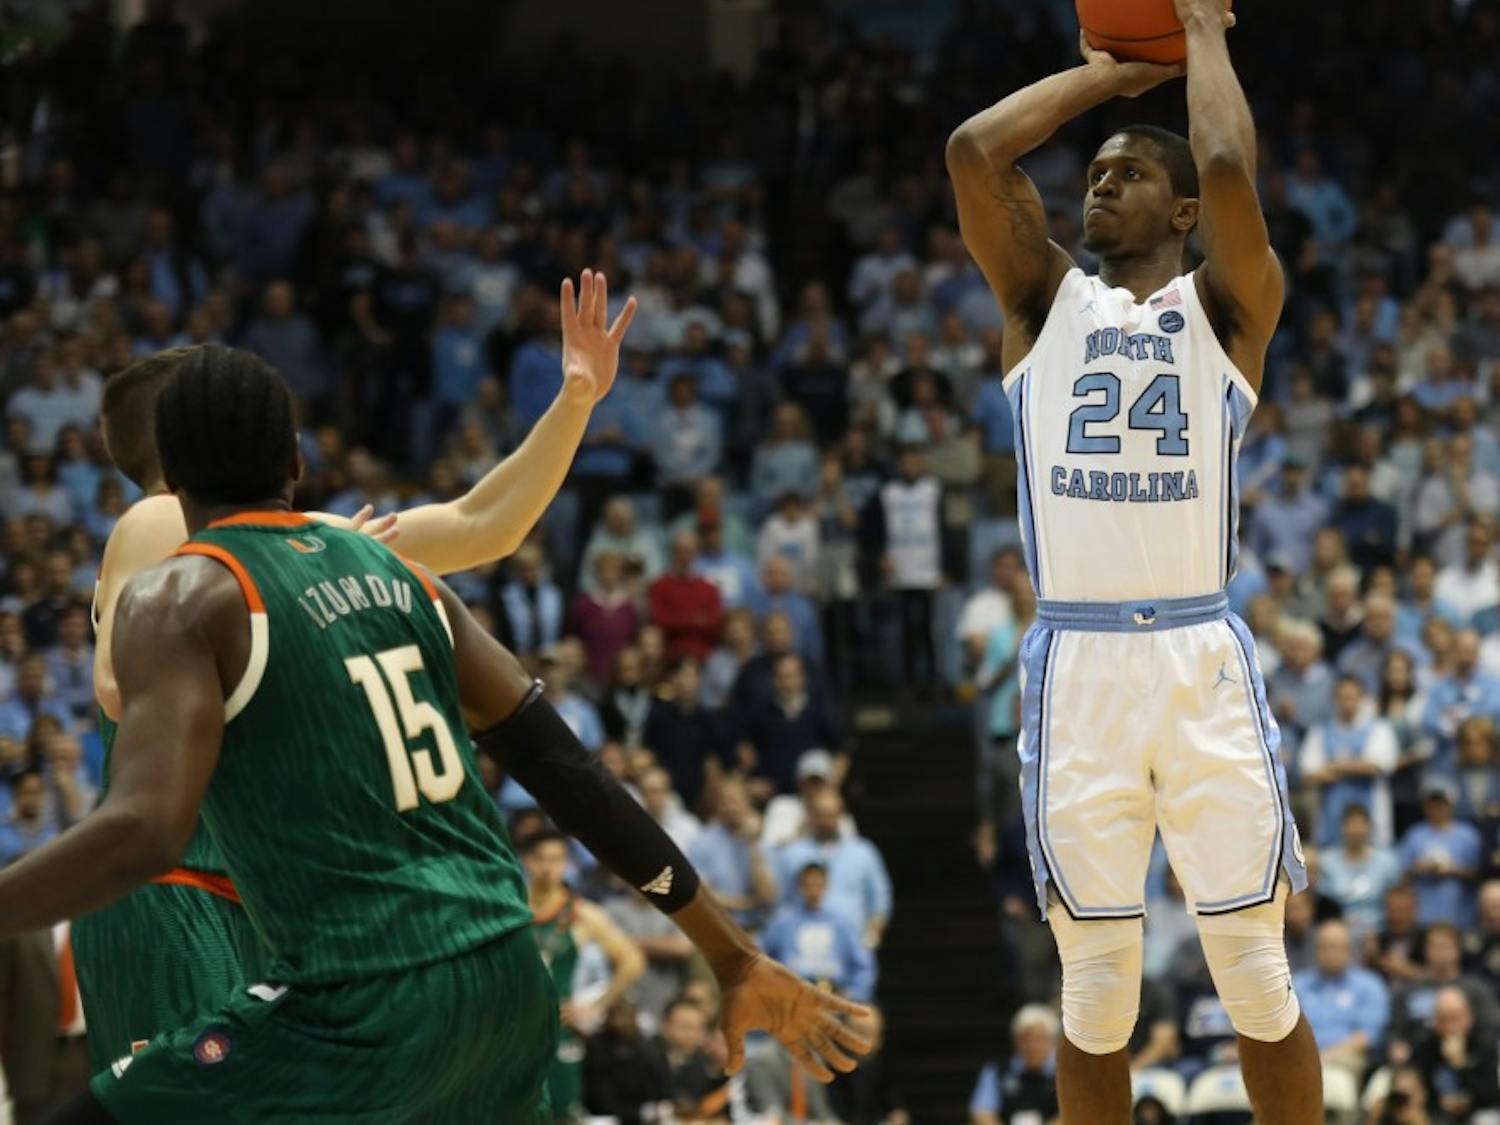 UNC senior guard Kenny Williams (24) shoots a three-pointer against Miami on Saturday, Feb. 9, 2019 in the Smith Center. UNC men's basketball defeated Miami 88-85 in overtime.